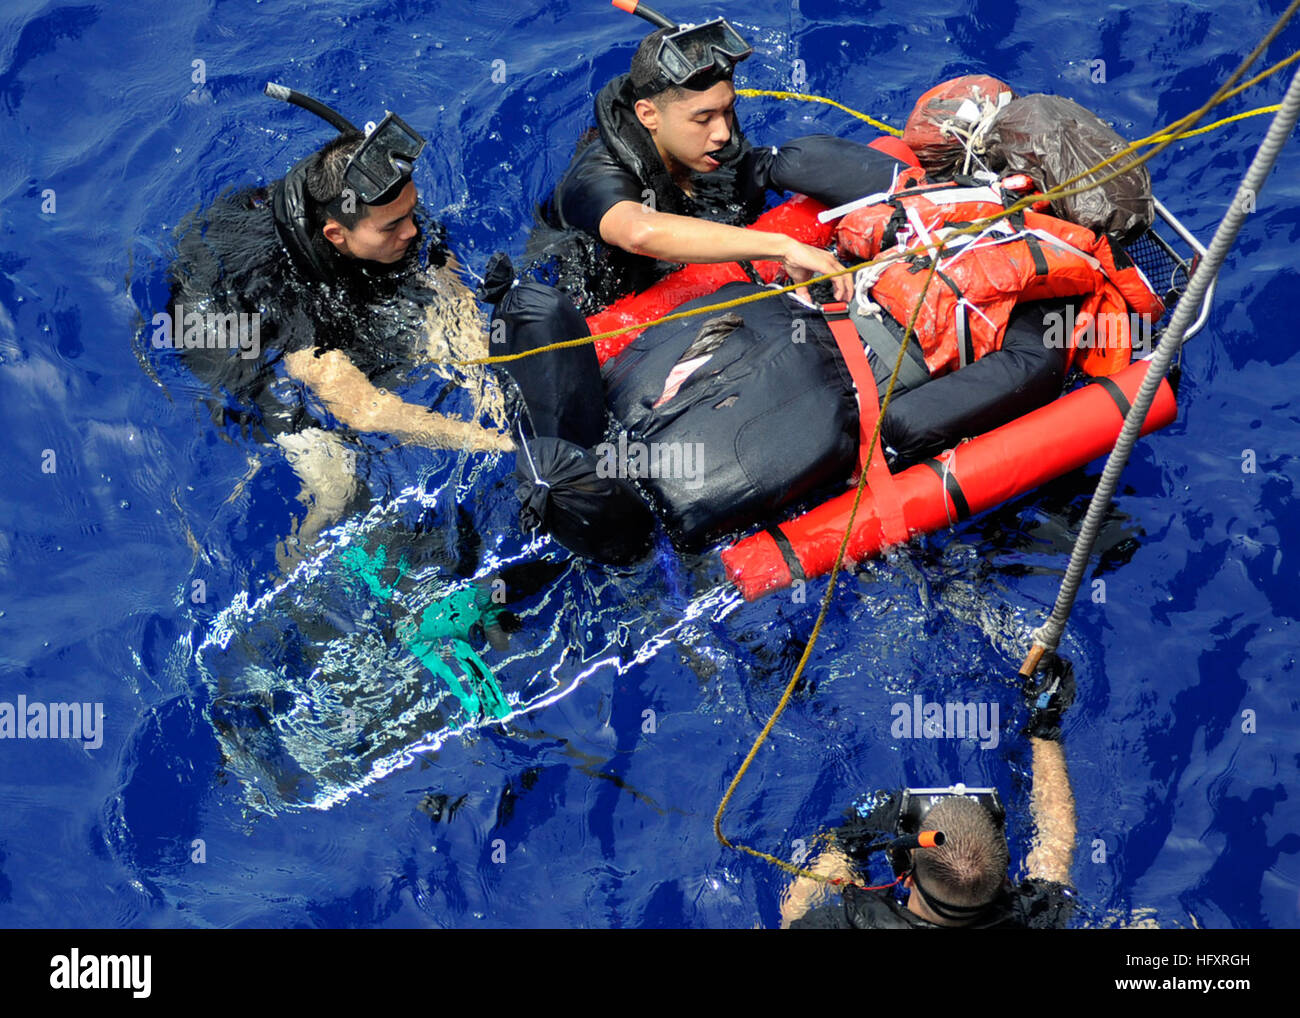 Man Overboard Rescue Stock Photos & Man Overboard Rescue Stock Images ...